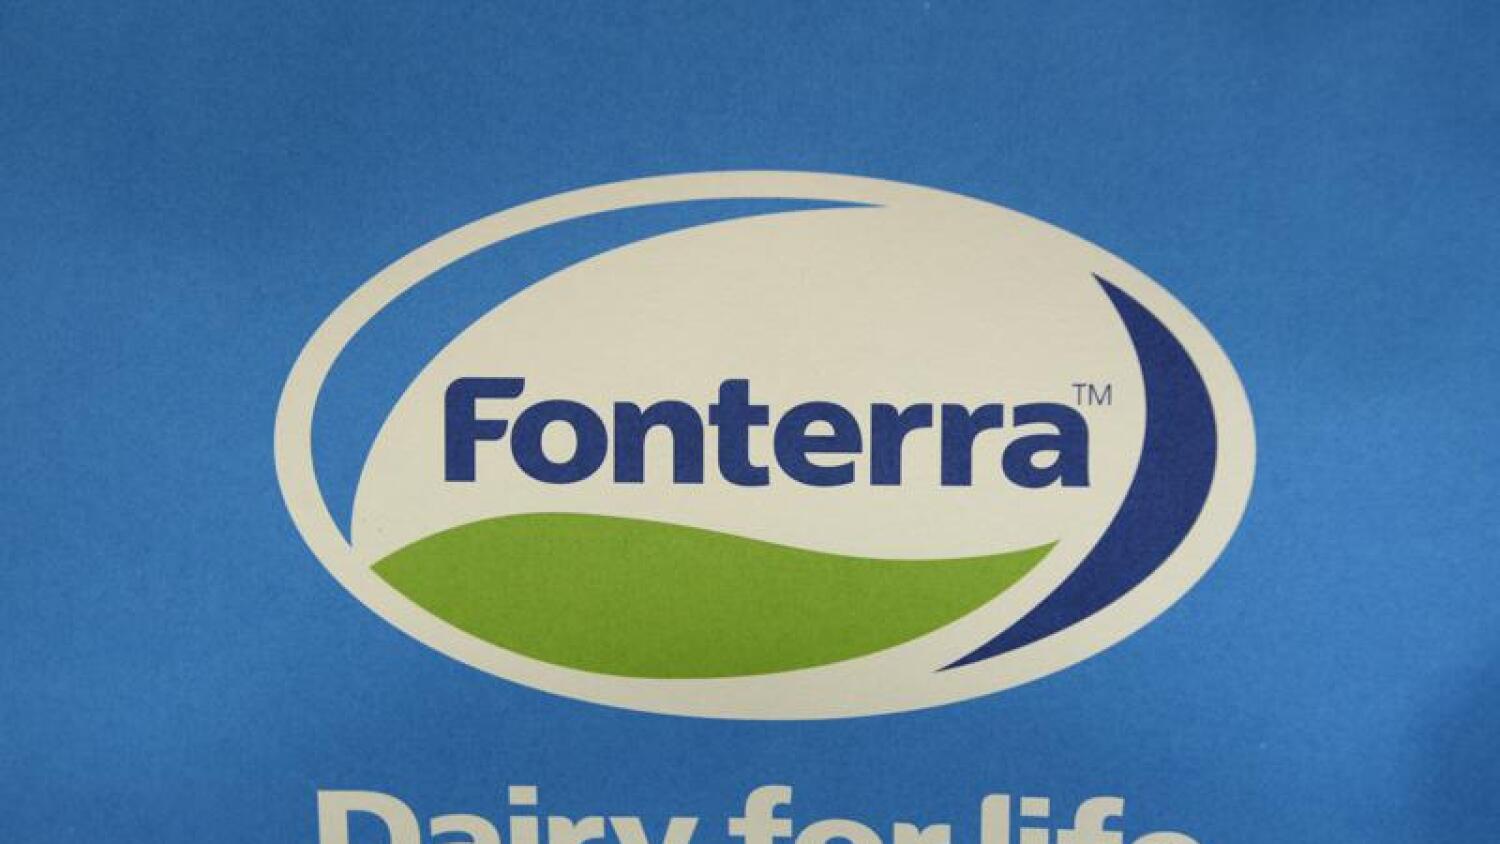 Fonterra heads the list for food processing companies operating in Australia. Photo by Julie Mercer